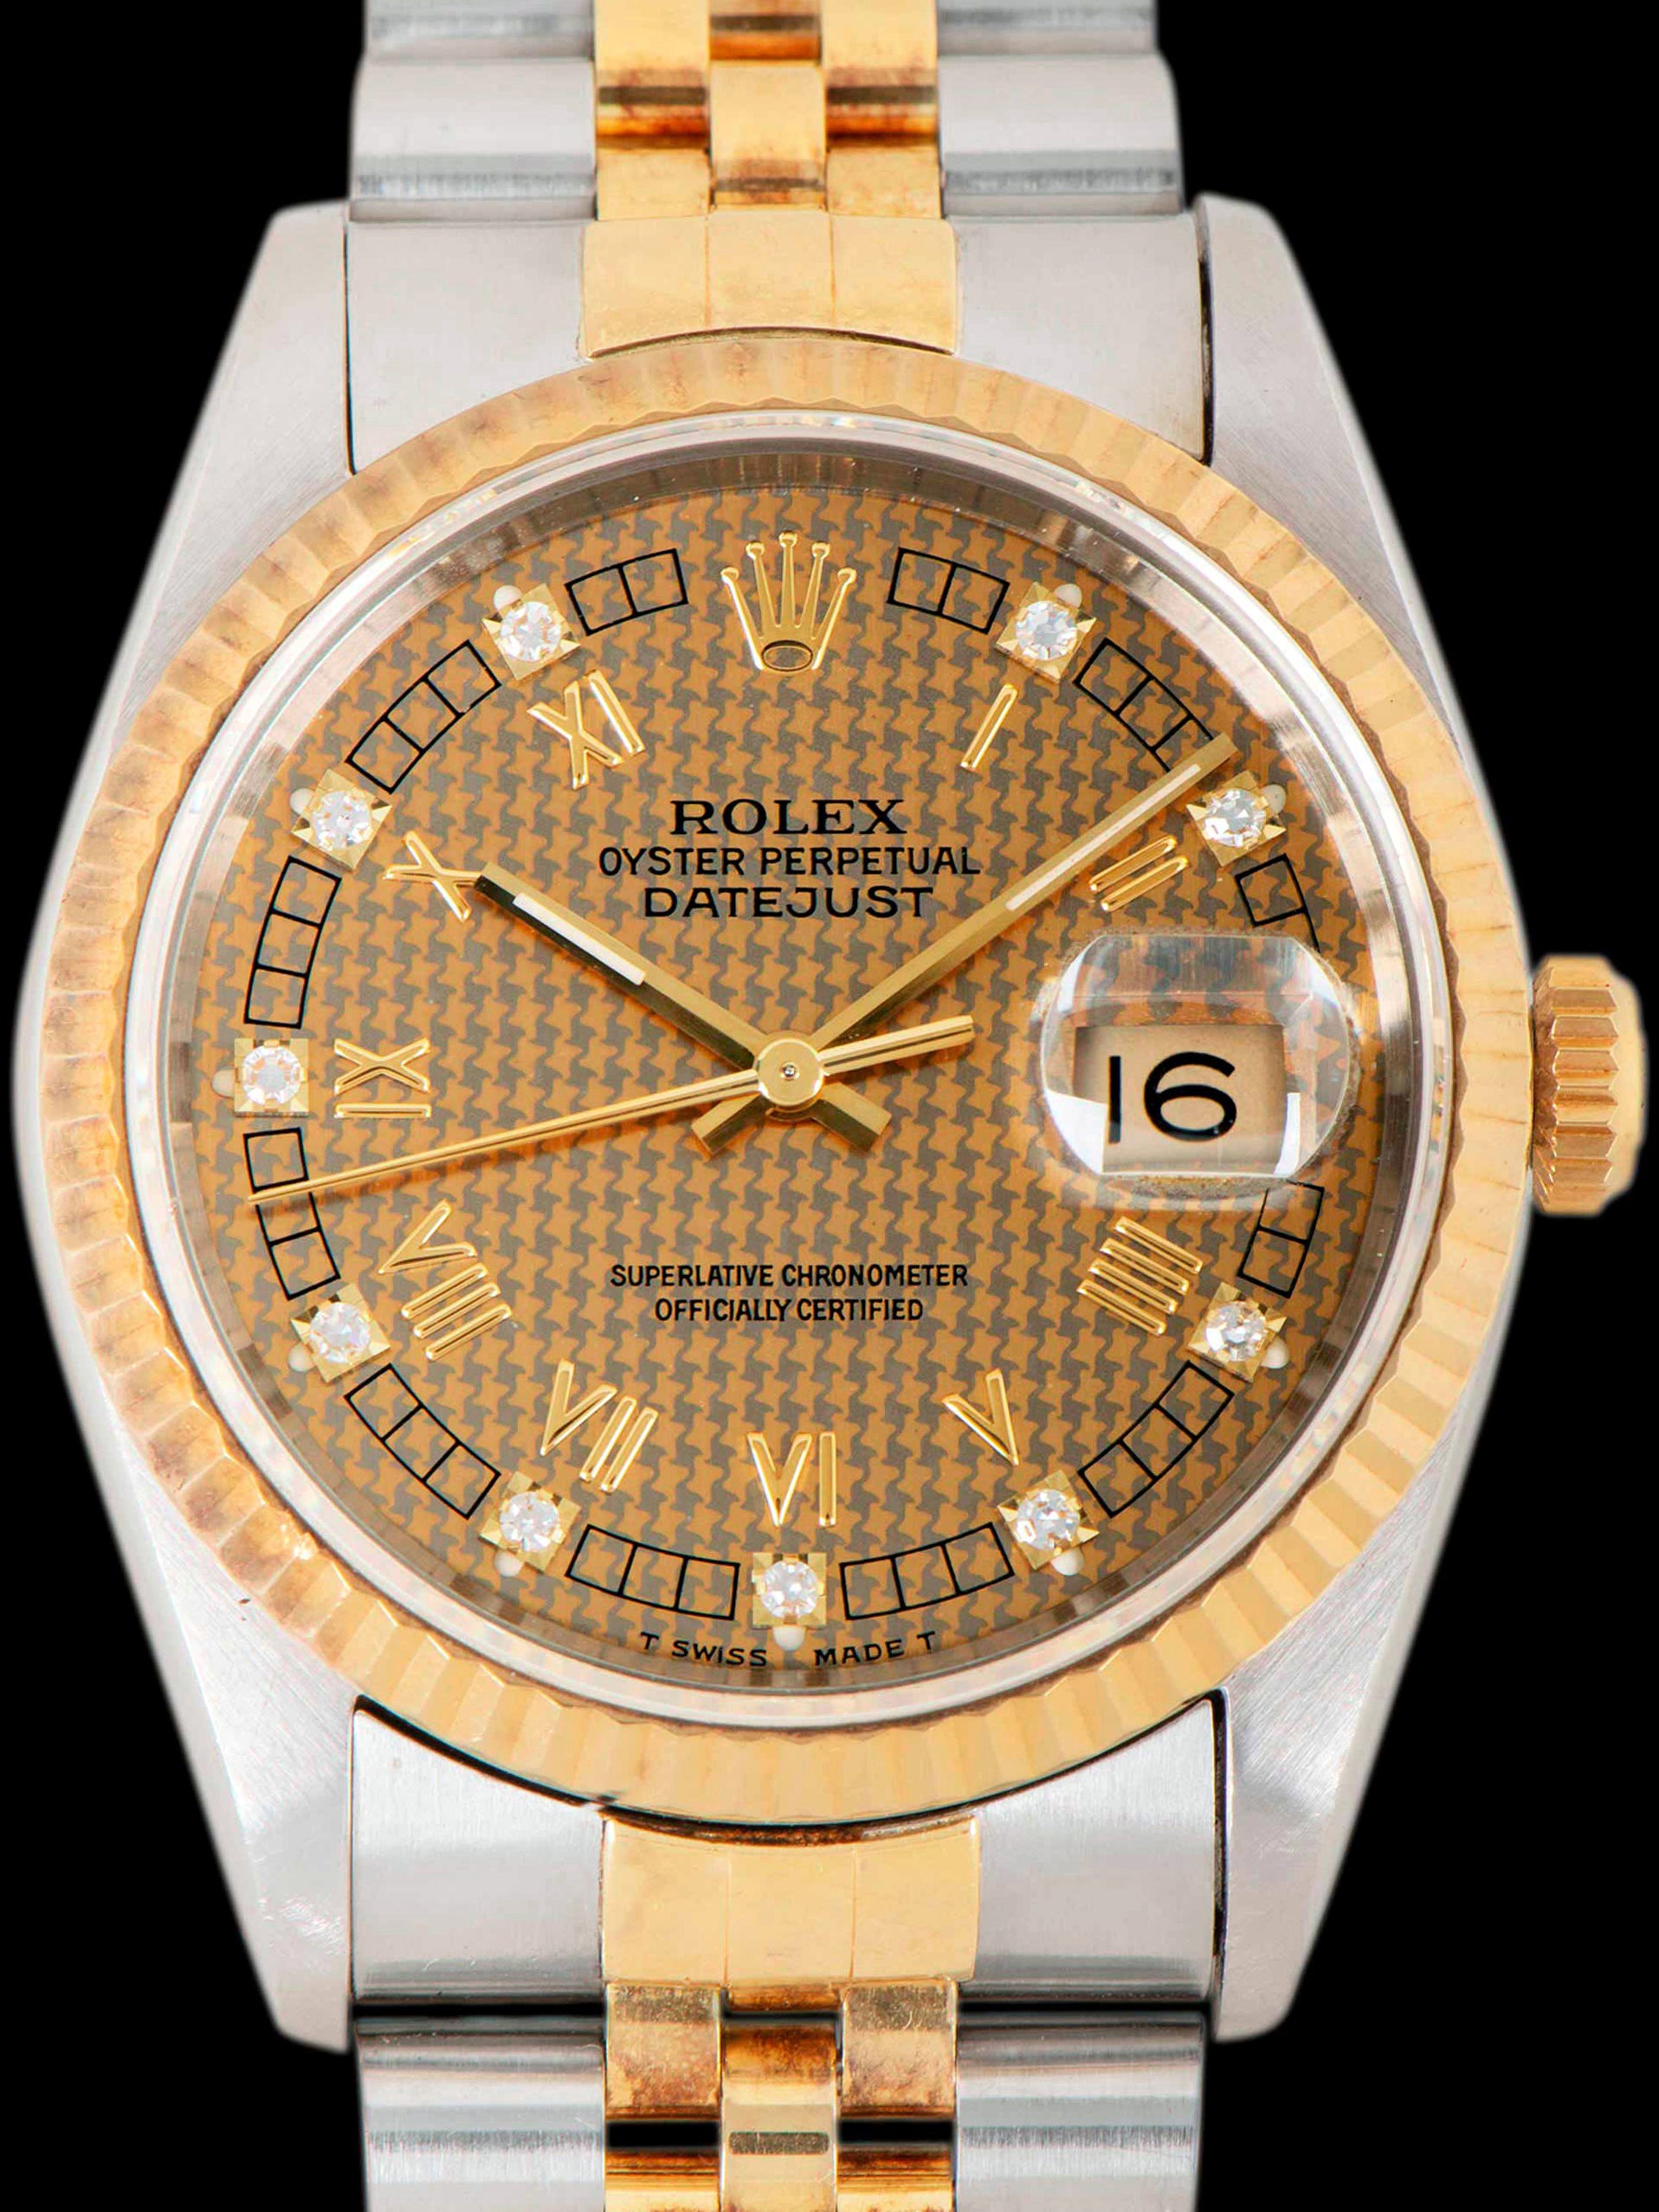 *Unpolished* 1993 Rolex Two-Tone Datejust (Ref. 16233) W/ Factory Diamond "Houndstooth" Dial